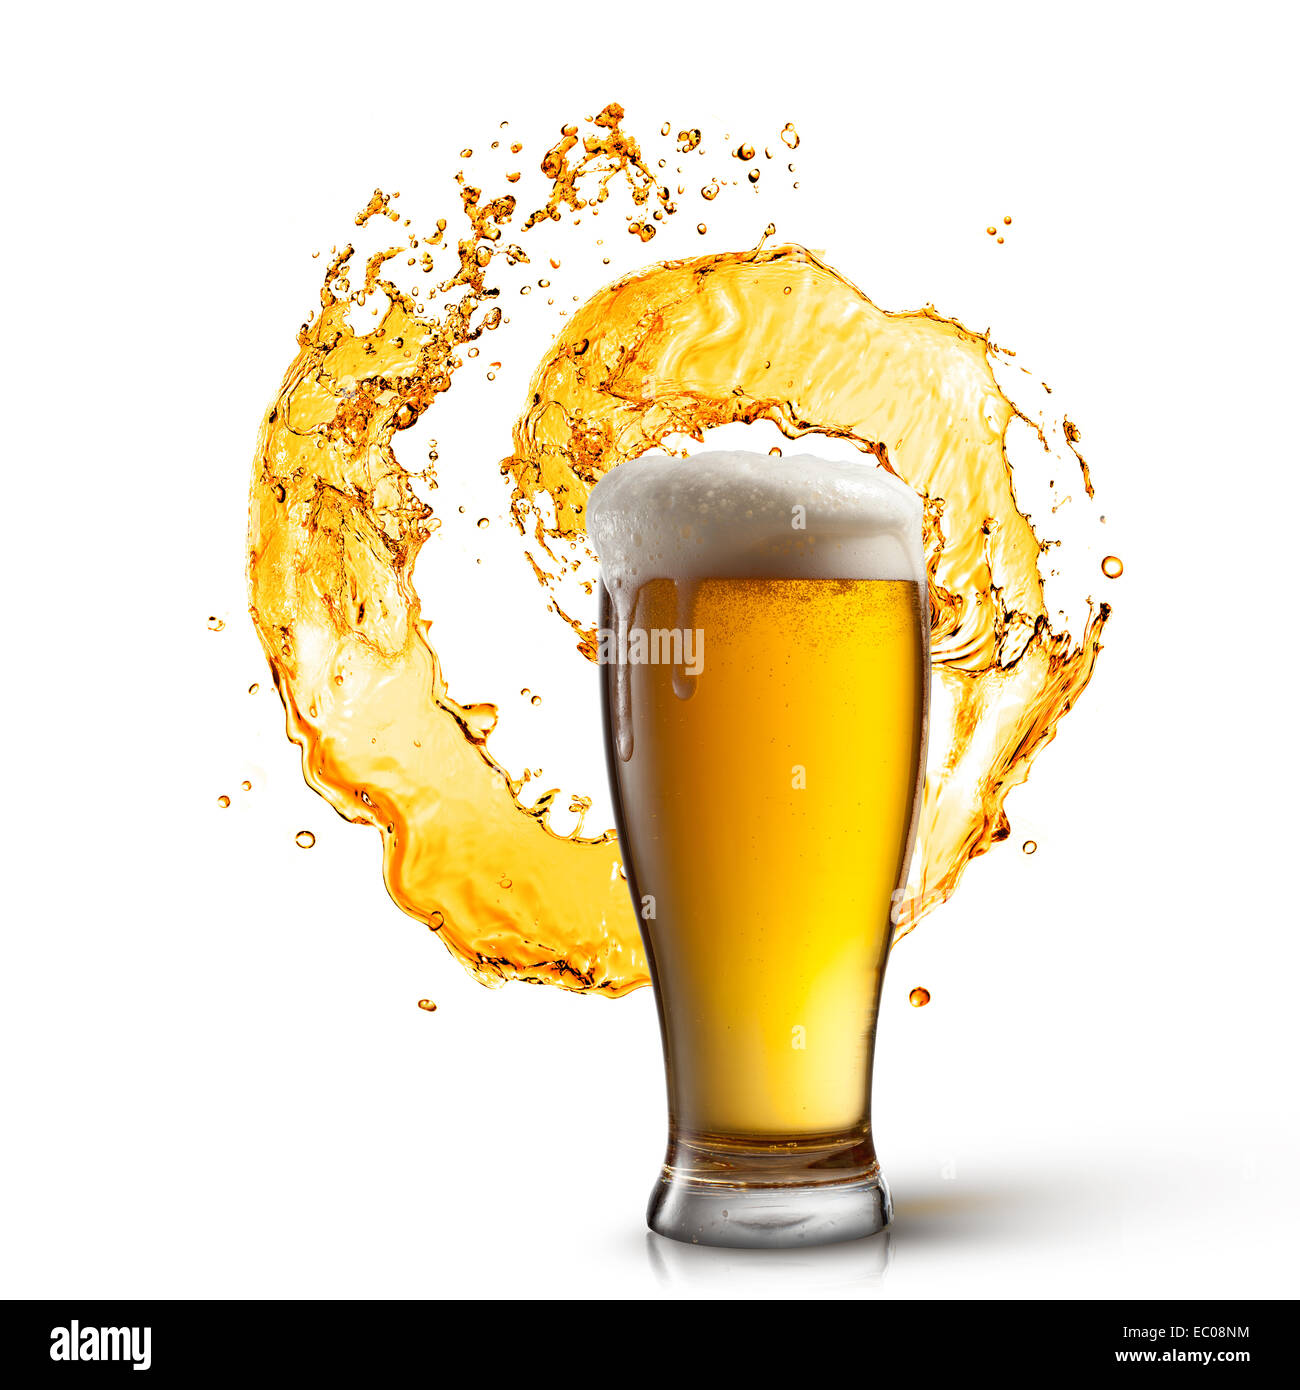 259,265 Beer Glass Isolated Royalty-Free Images, Stock Photos